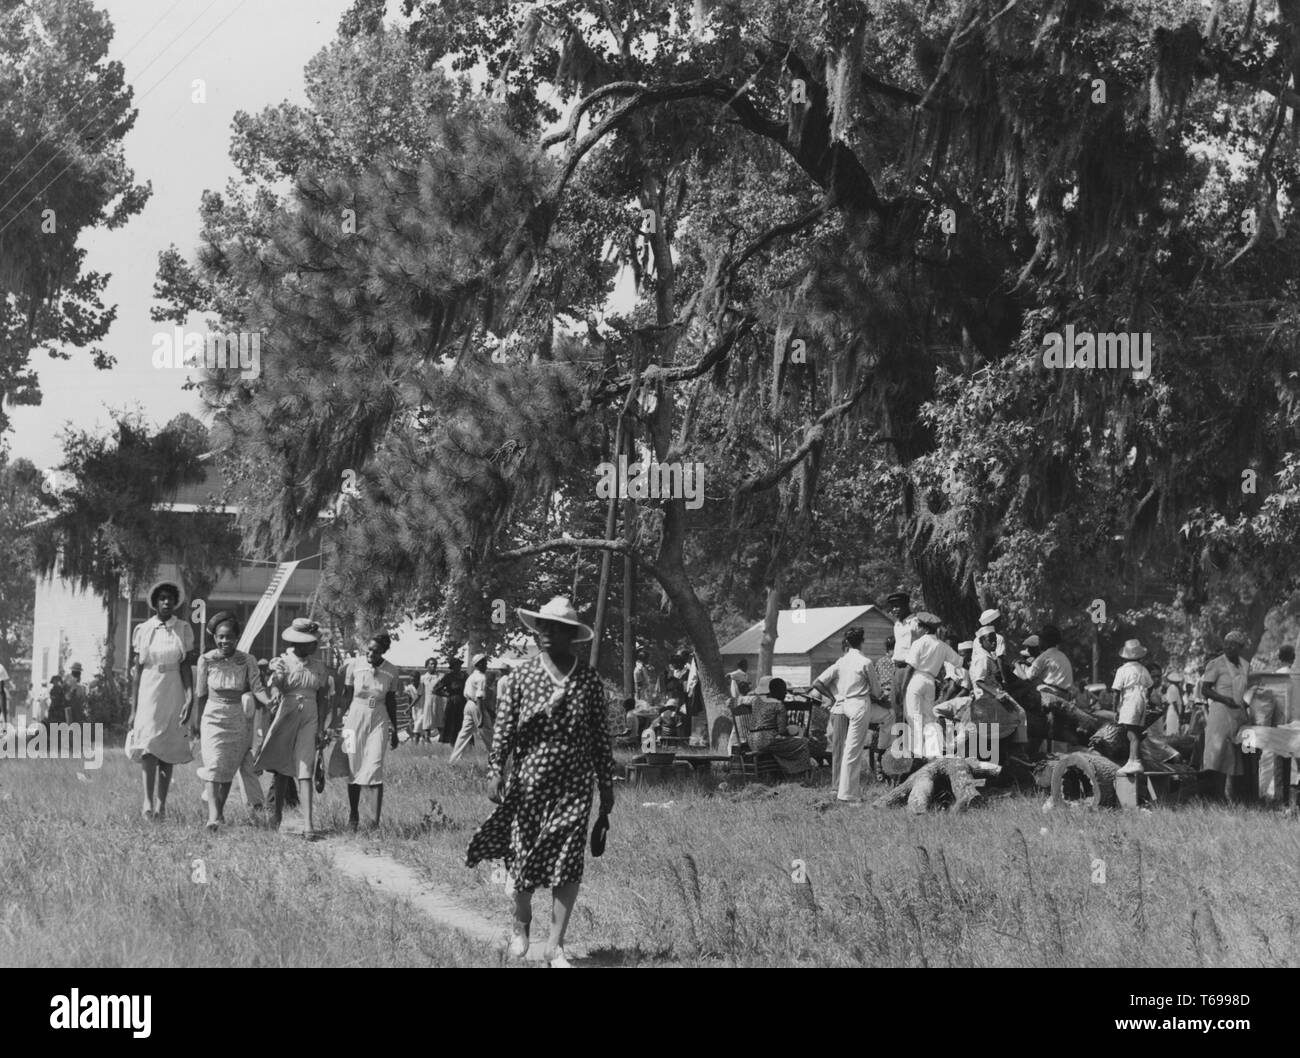 Black and white photograph of a group of African American men and women, enjoying themselves at a picnic or garden party; with a woman, wearing a large hat and a polka-dotted dress, walking toward the camera in the foreground, followed by a row of four young women wearing pale dresses, and with large trees and several buildings visible in the background; located in Beaufort, South Carolina, USA; photographed by Marion Post Wolcott, under the sponsorship of the United States' Farm Security Administration, July, 1939. From the New York Public Library. () Stock Photo